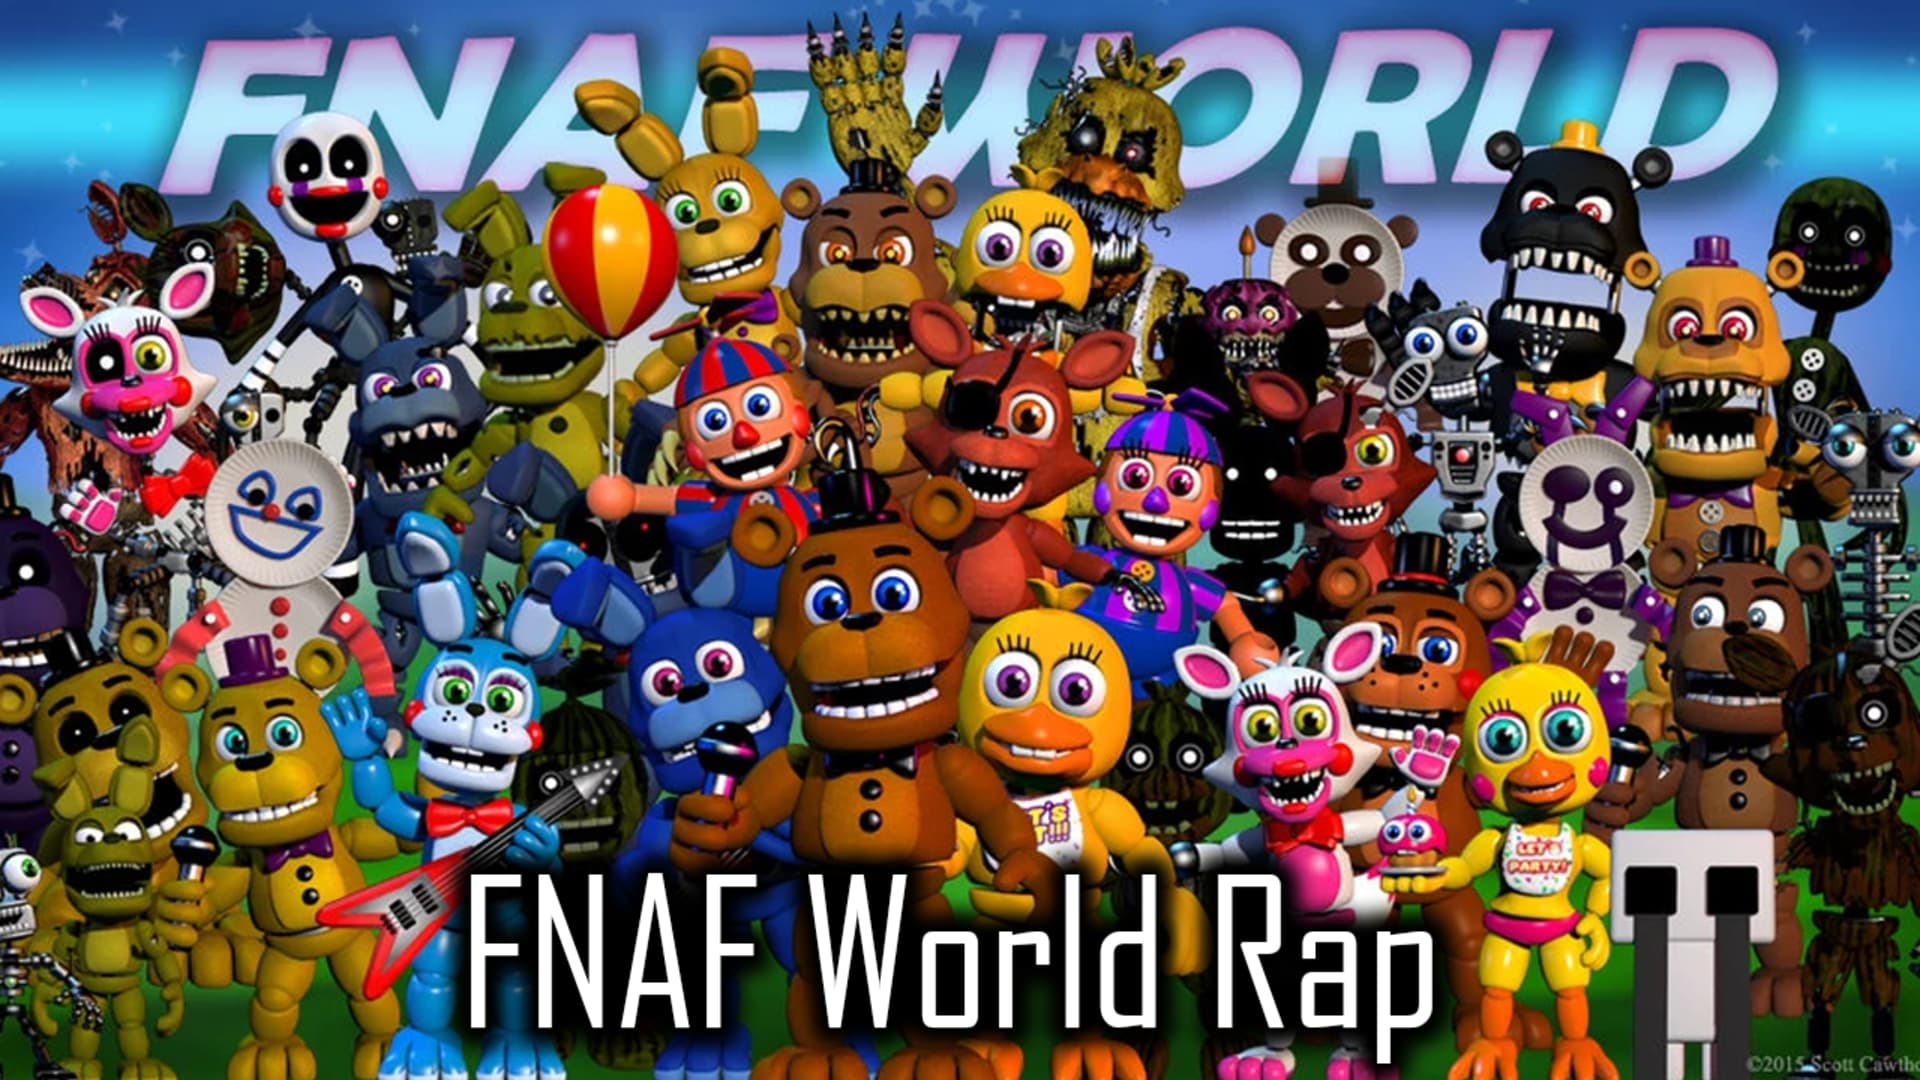 Fnaf World Rap Join The Party Rooster Teeth - five long nights roblox id code